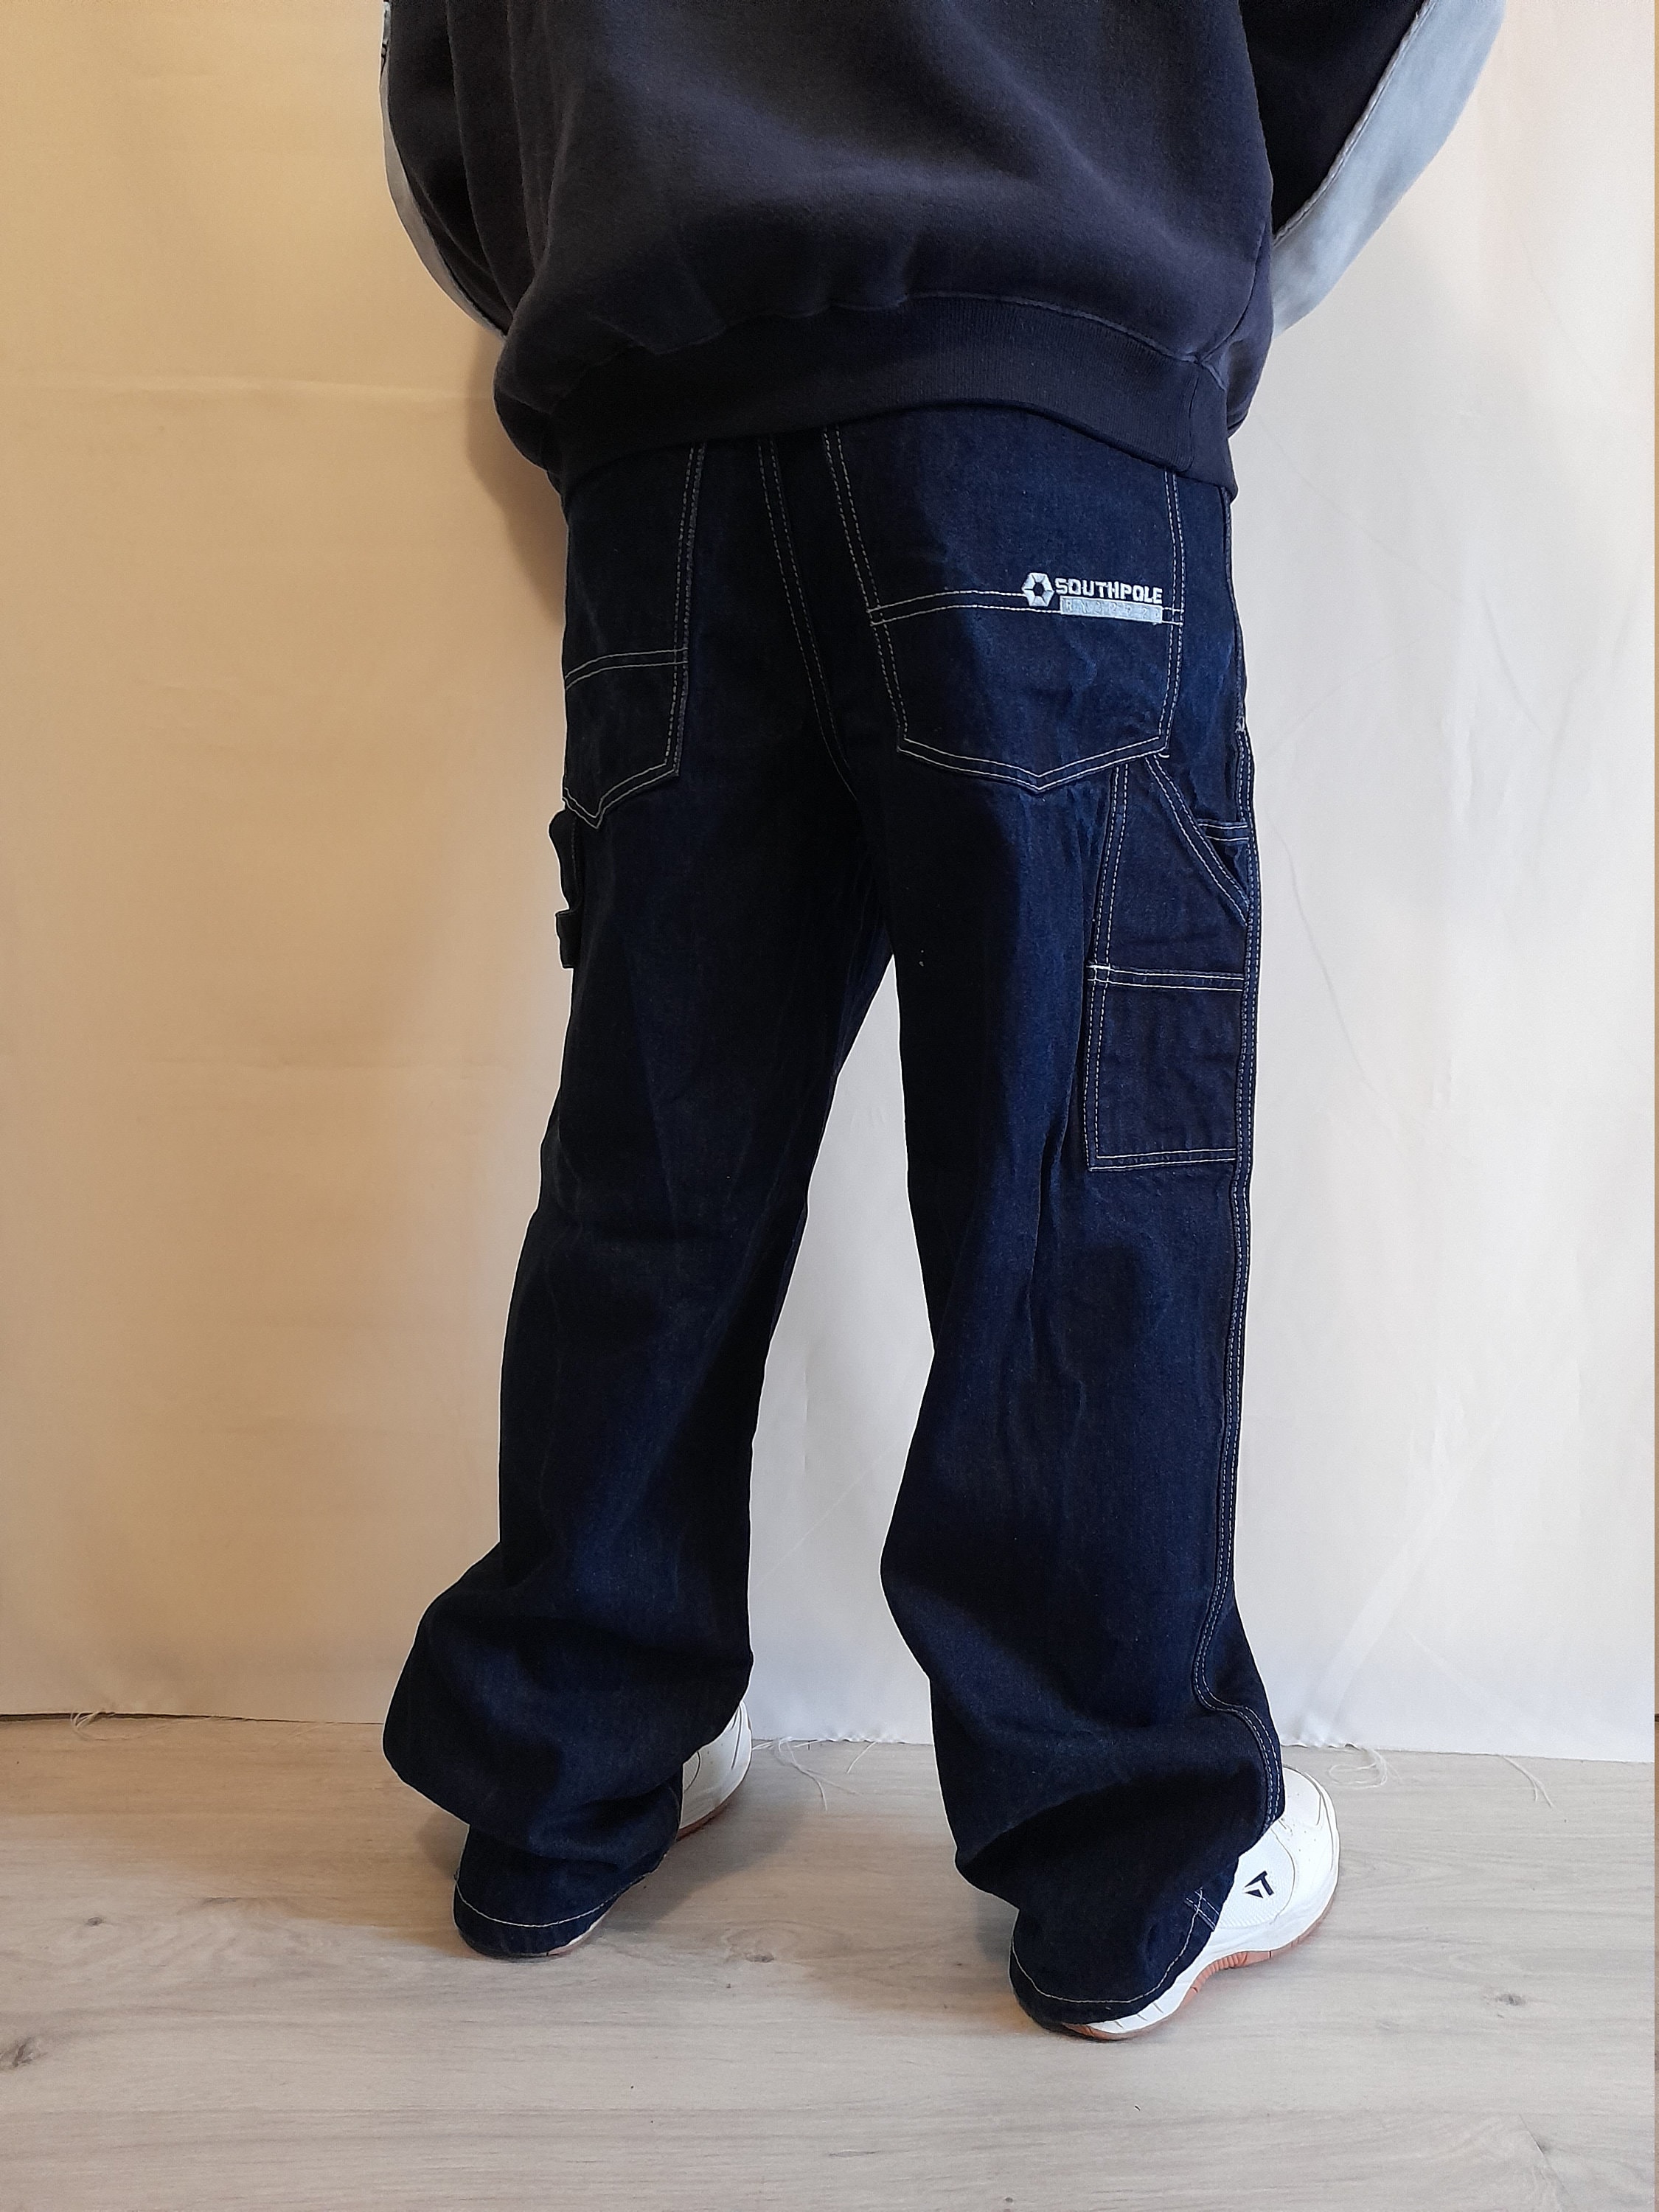 Share 84+ south pole pants for guys latest - in.eteachers